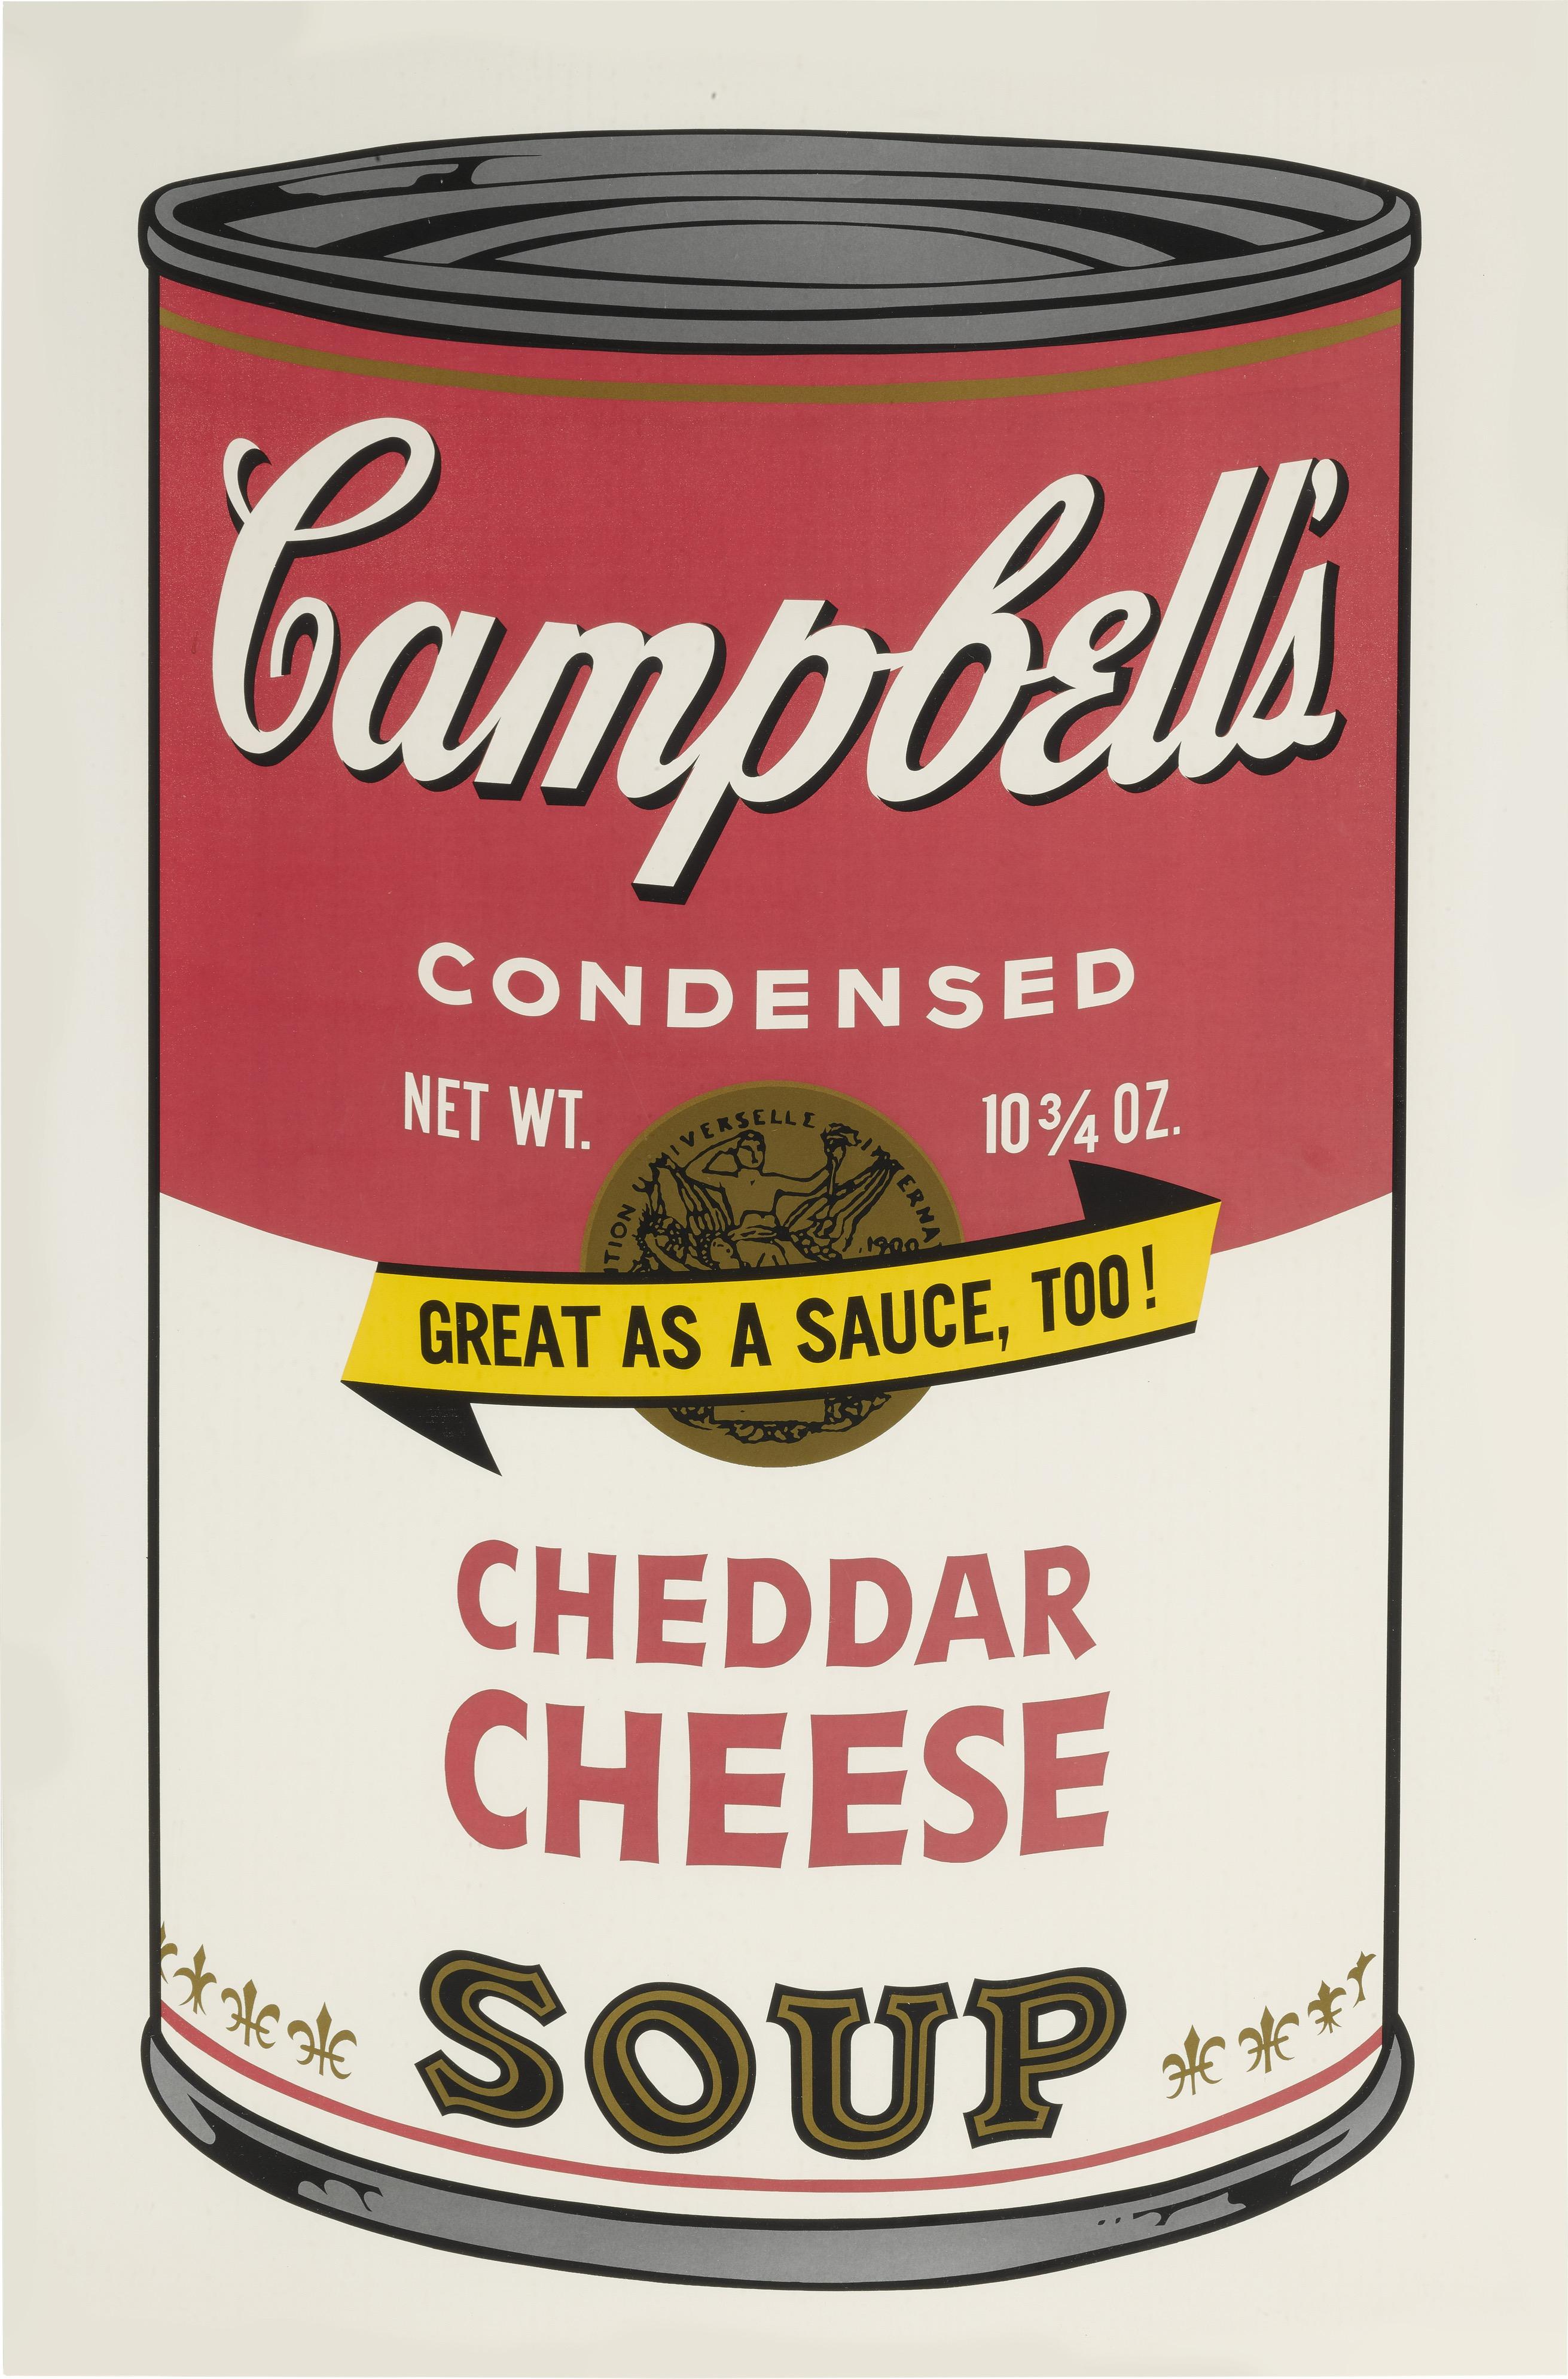 Andy Warhol Interior Print - Campbell's Soup II, Cheddar Cheese F&S II.63